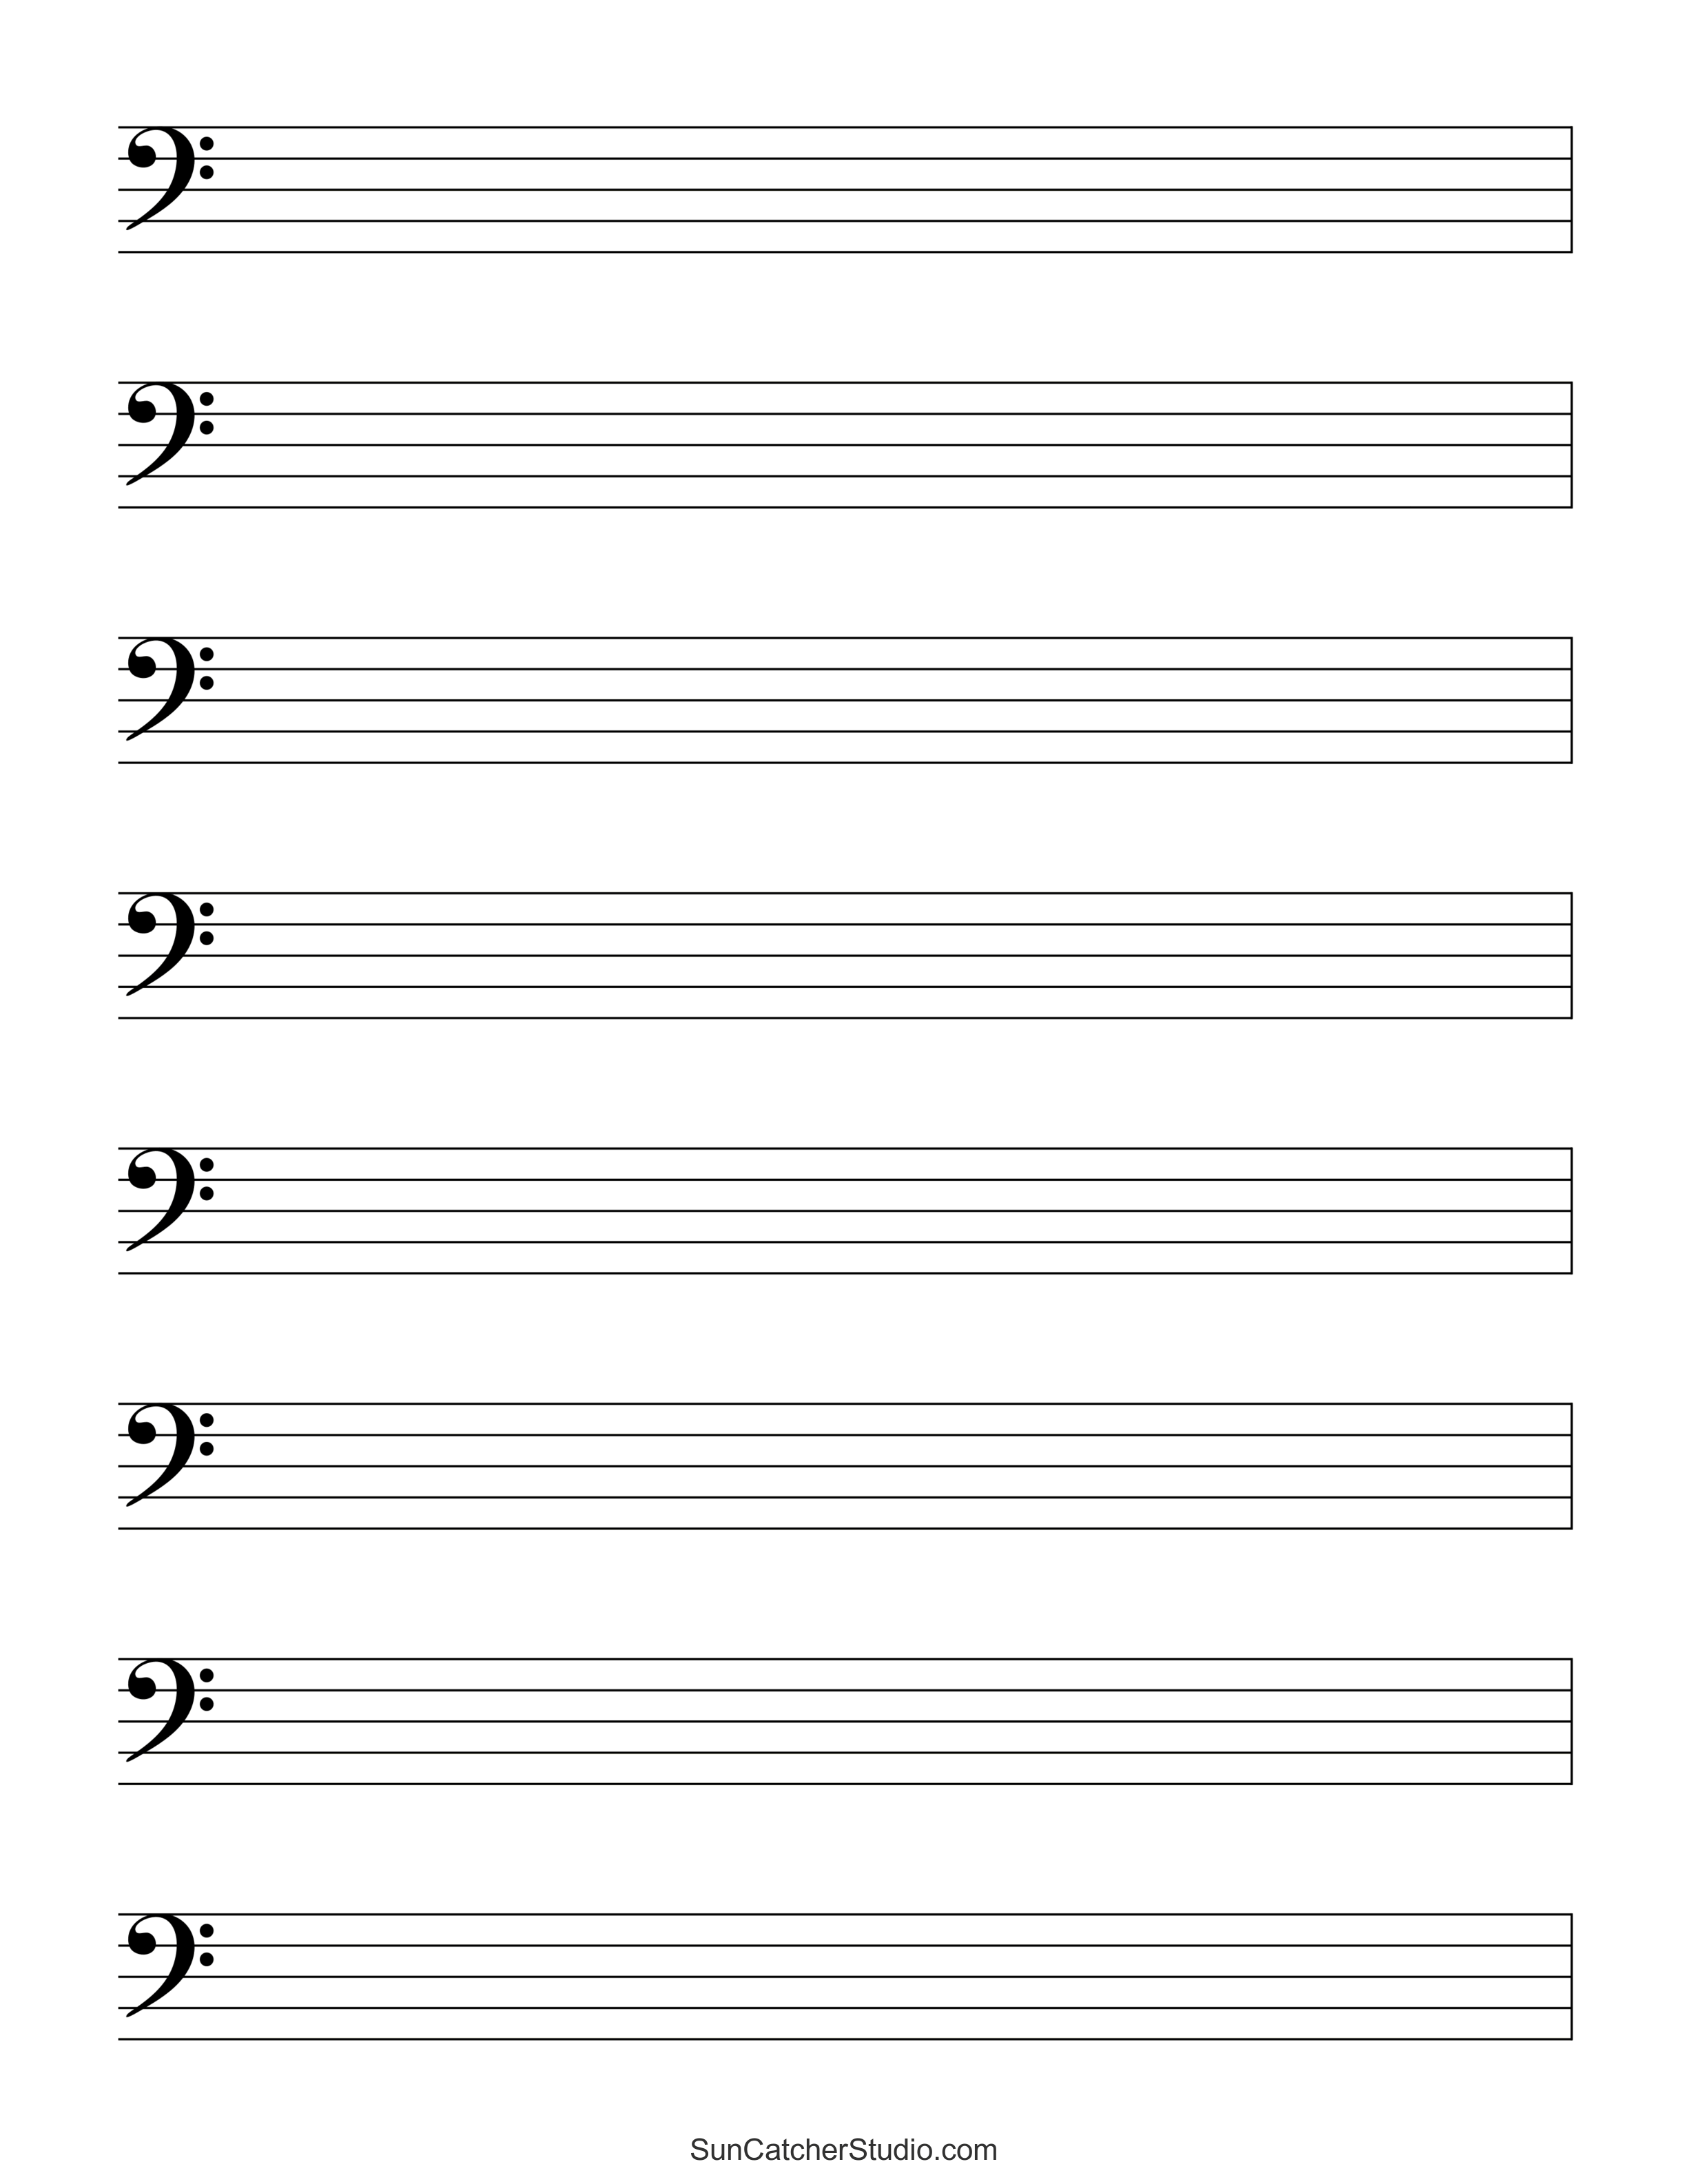 Blank 8 Stave Music Sheet 2296